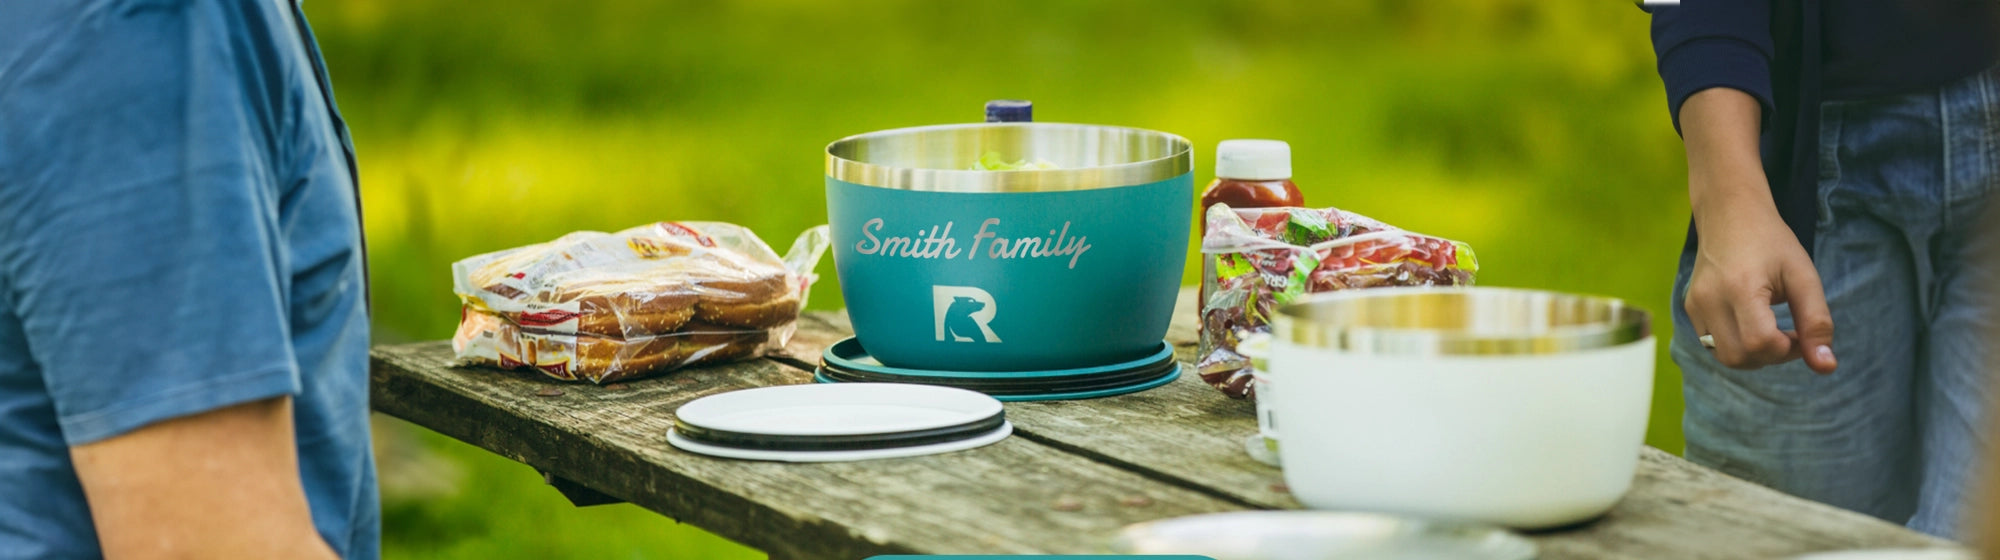 customized rtic food bowl with engraving the reads smith family